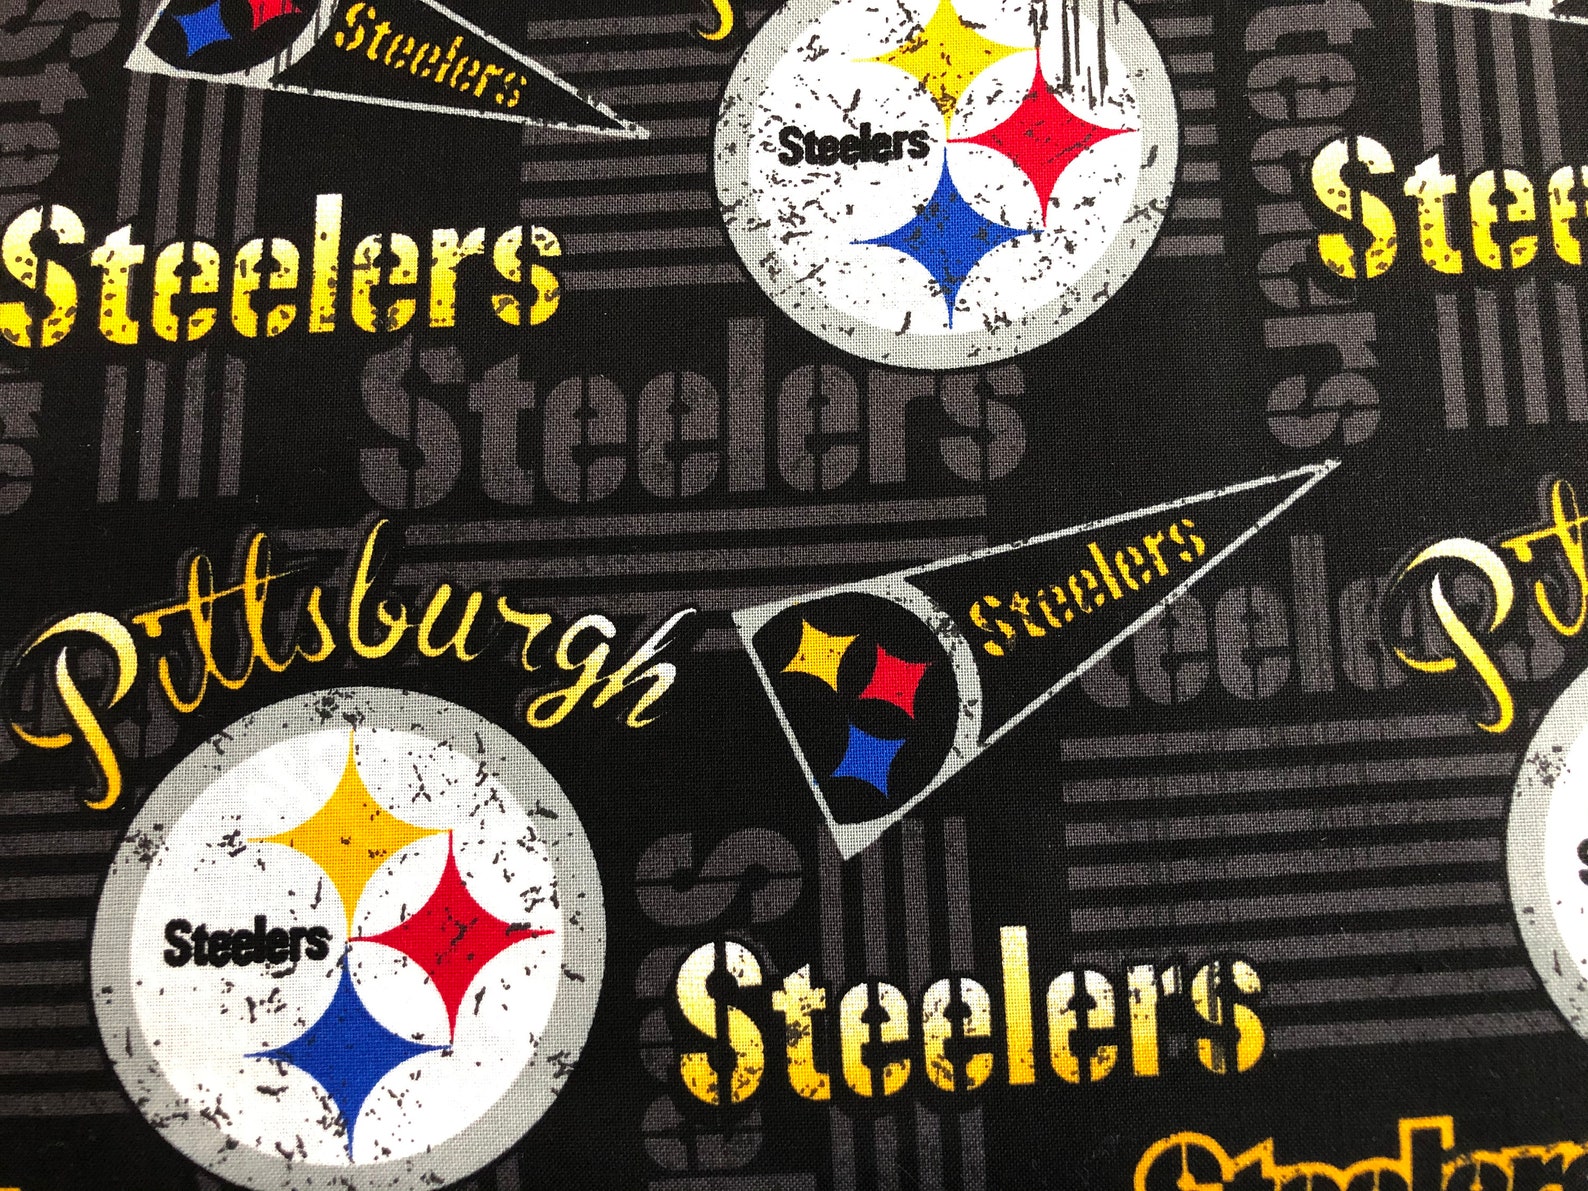 PITTSBURGH STEELERS V 60 Wide Cotton Fabric by the Yard - Etsy